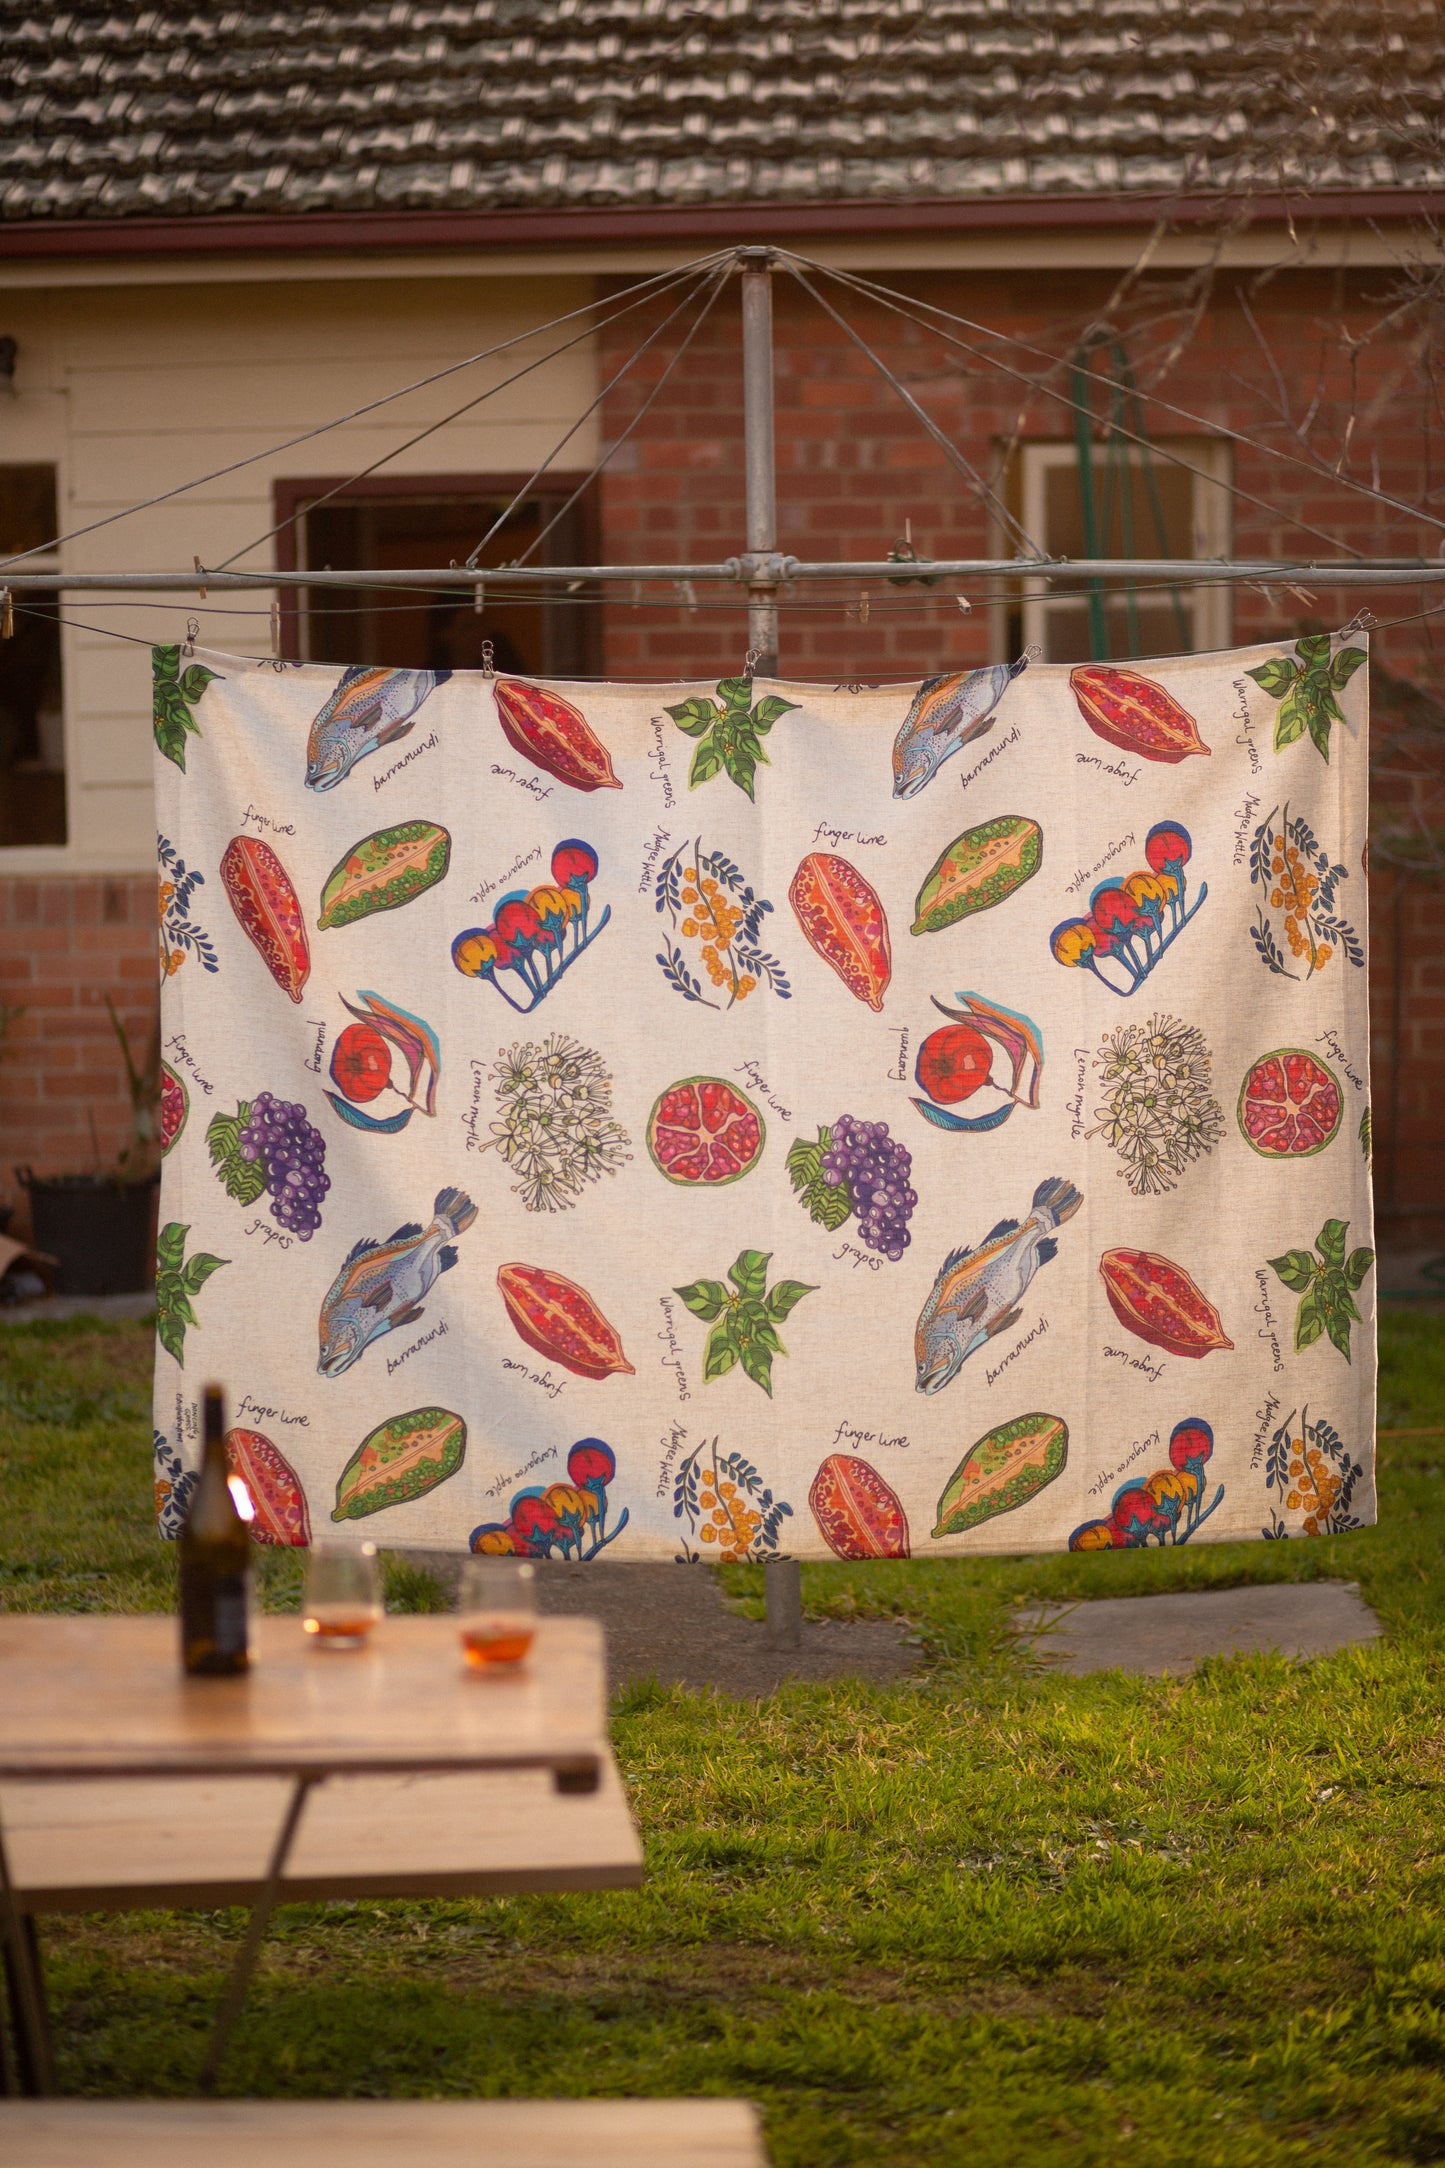 A colorful, illustrated tablecloth with food motifs hanging on a clothesline in a backyard, with a picnic table and drinks in the foreground